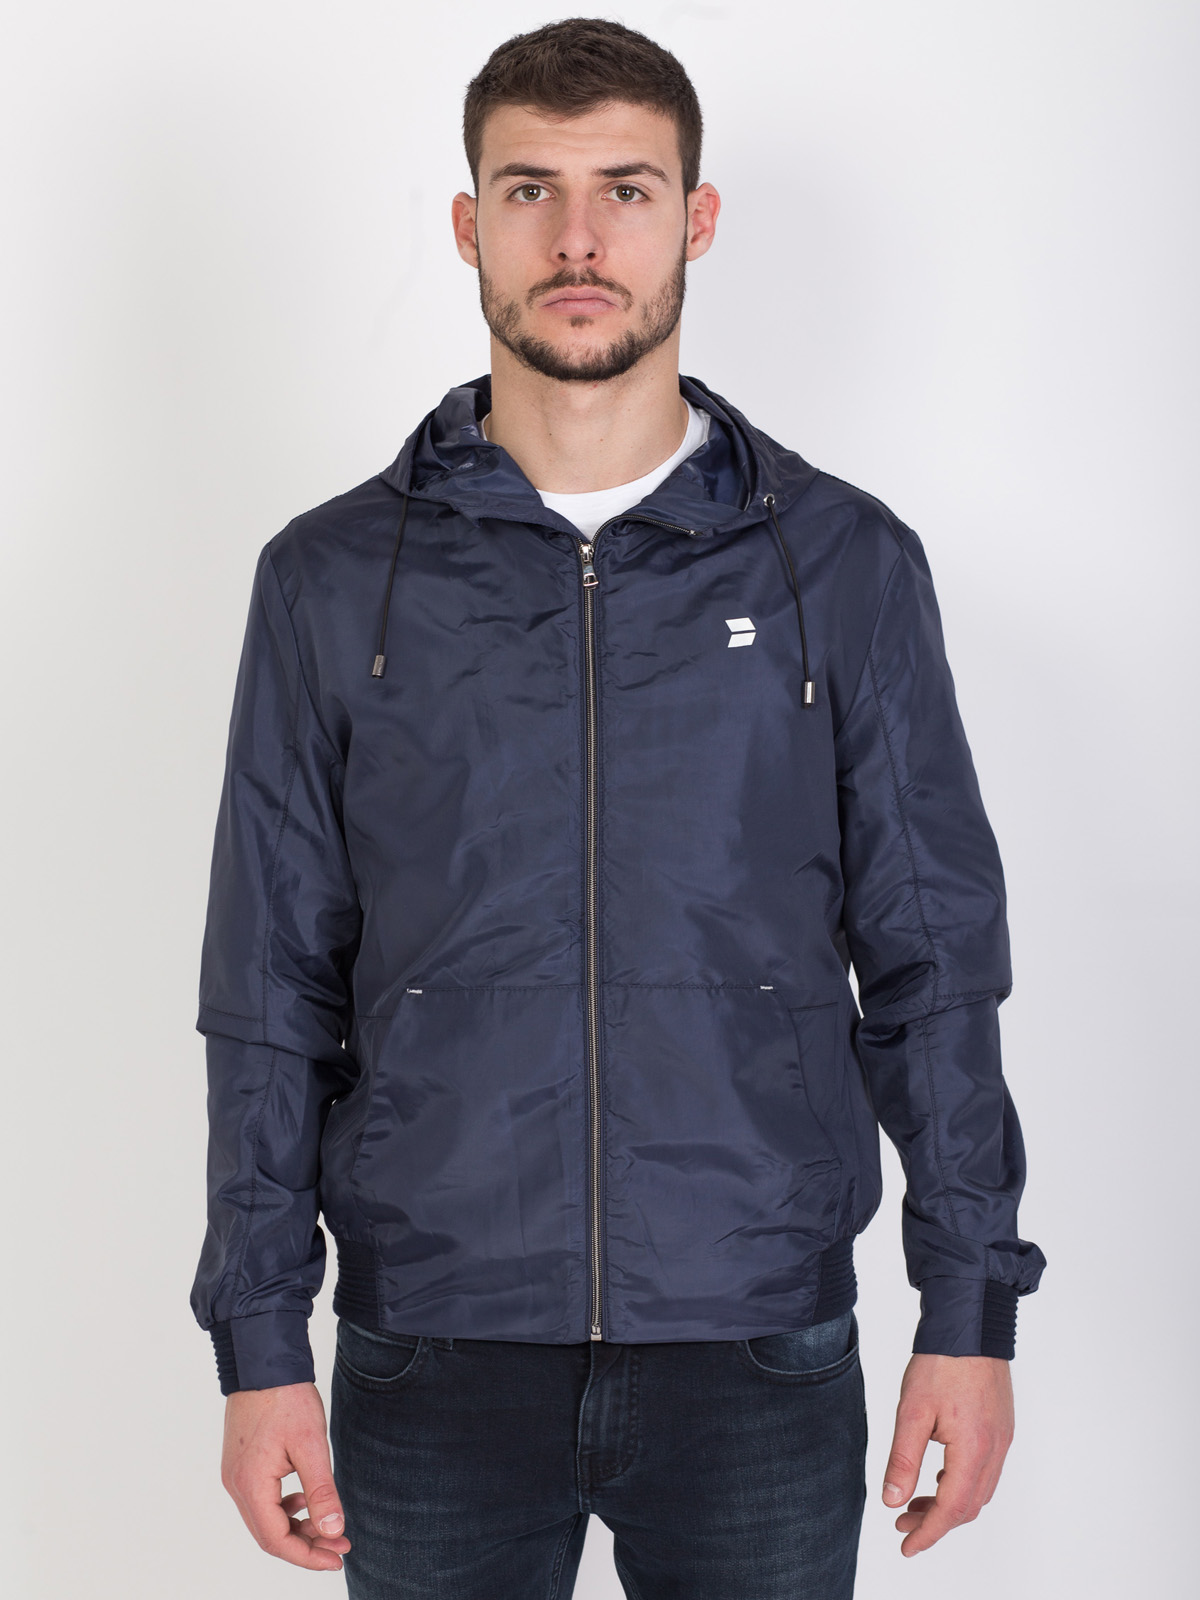 Sports mens jacket with hood blue - 66024 € 55.68 img2